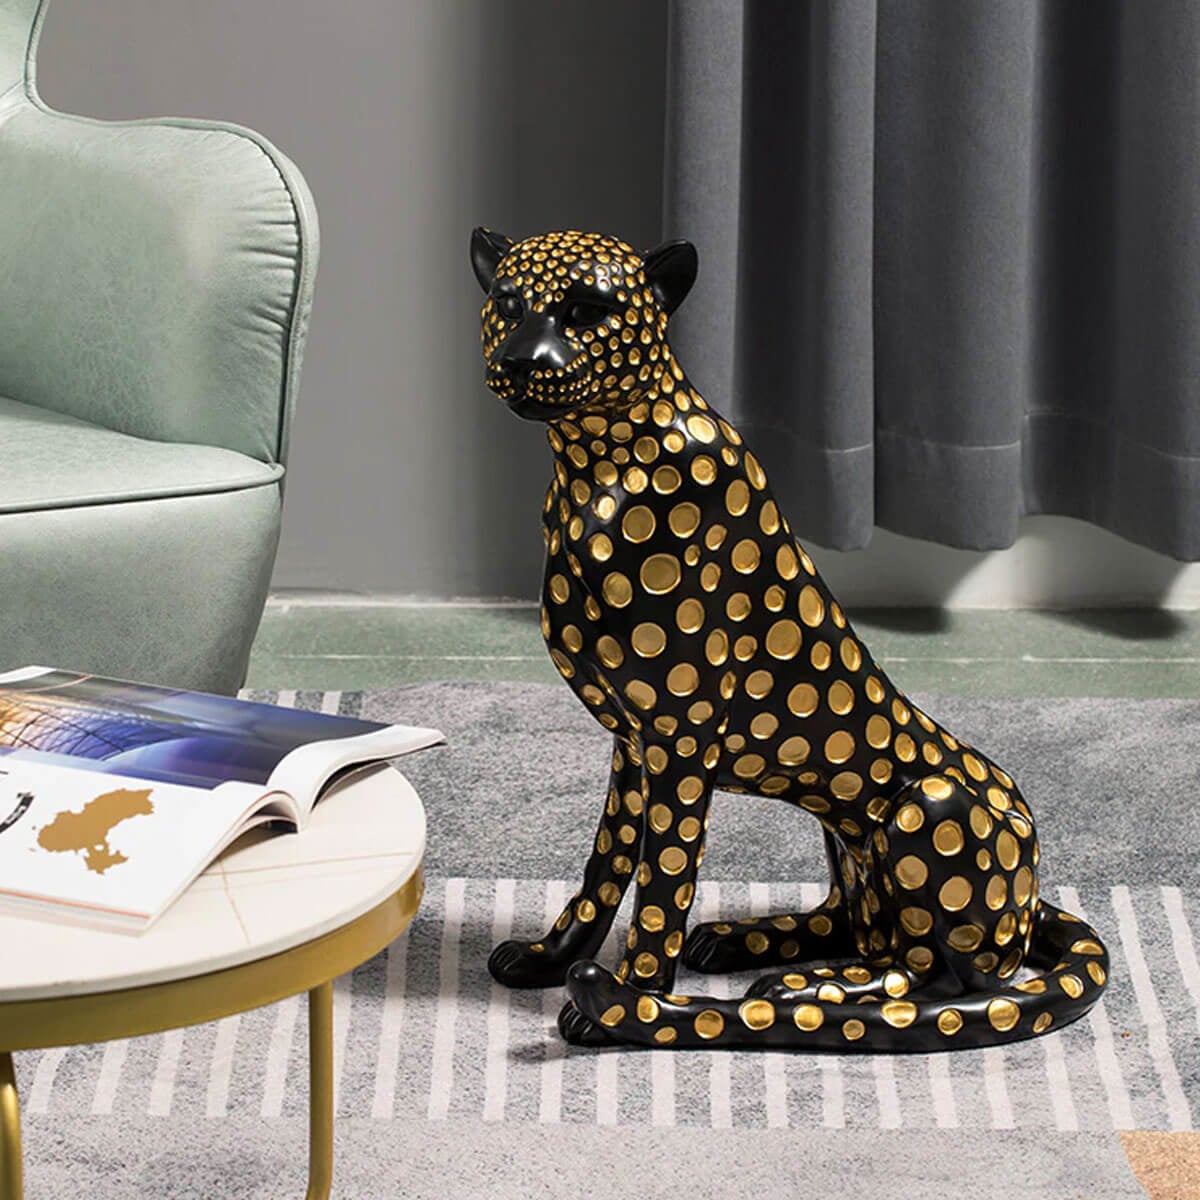 Black and Gold Leopard Statue Sitting on Table Black and Gold Leopard Statue  Resin Leopard Figurine Black and Gold Home Décor 